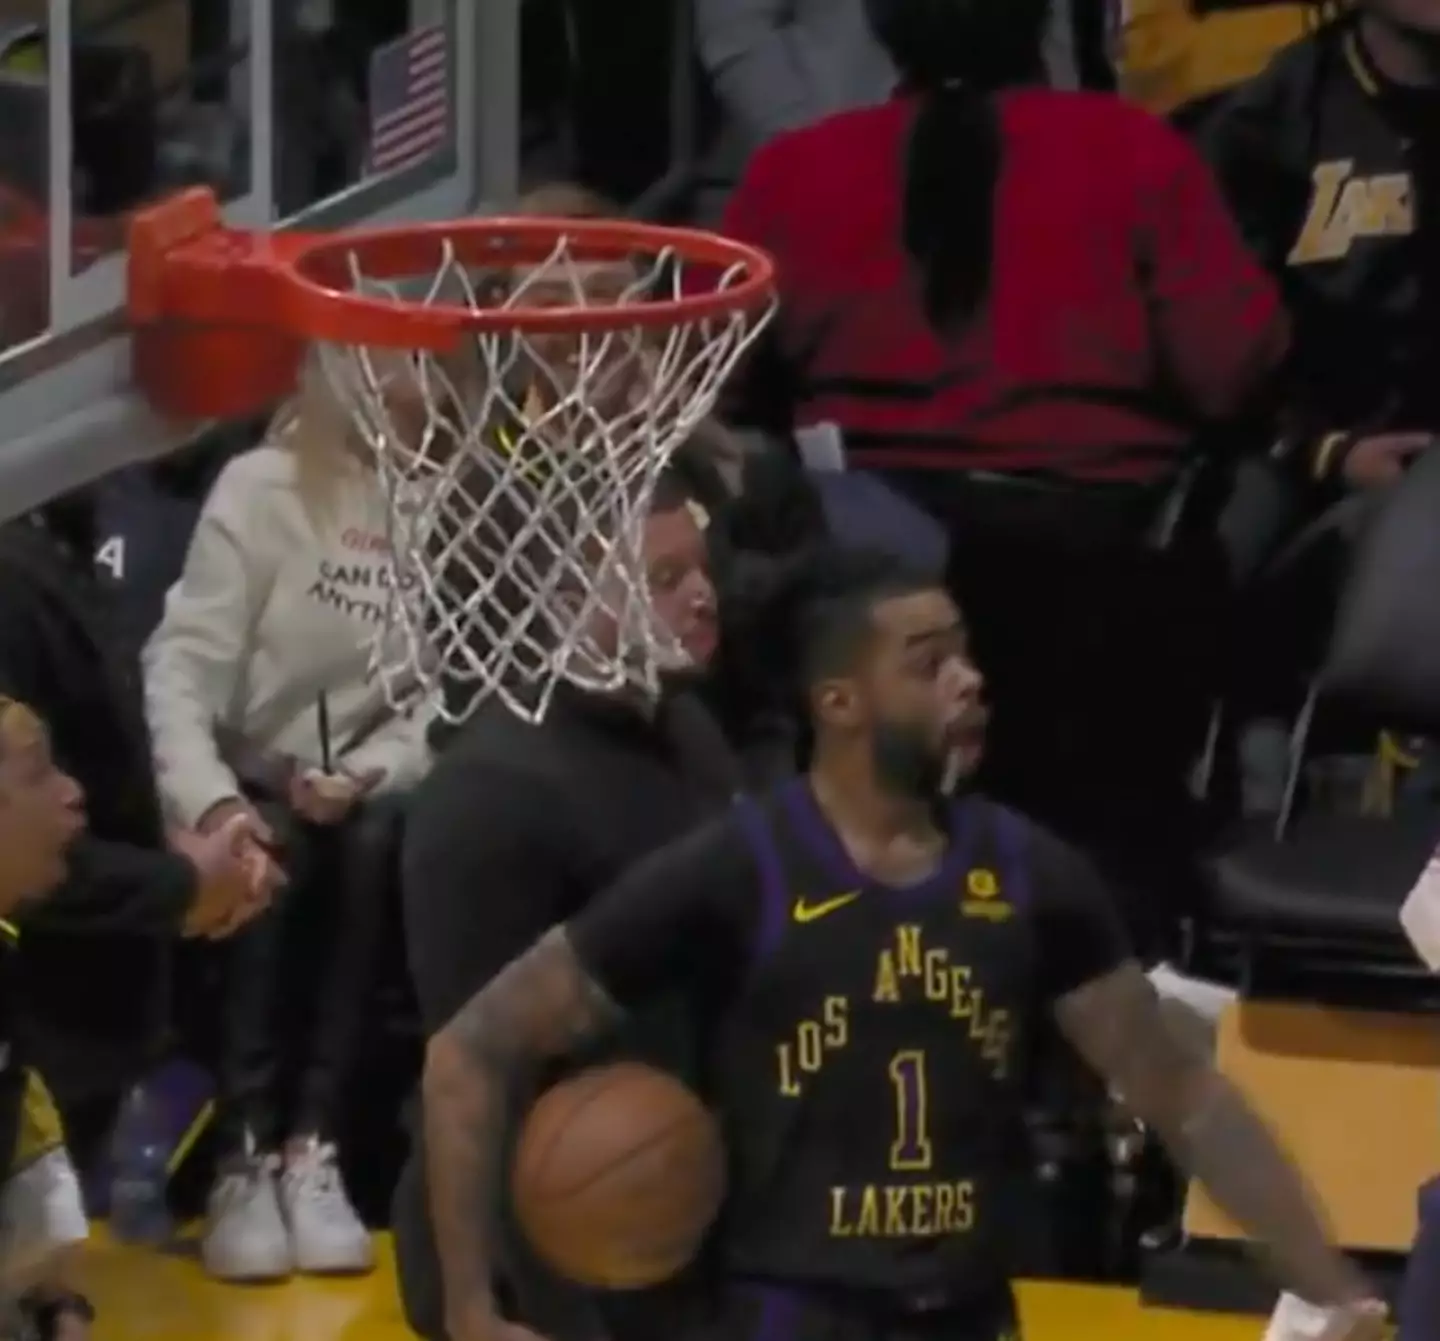 D’Angelo Russell was stunned by the shot.